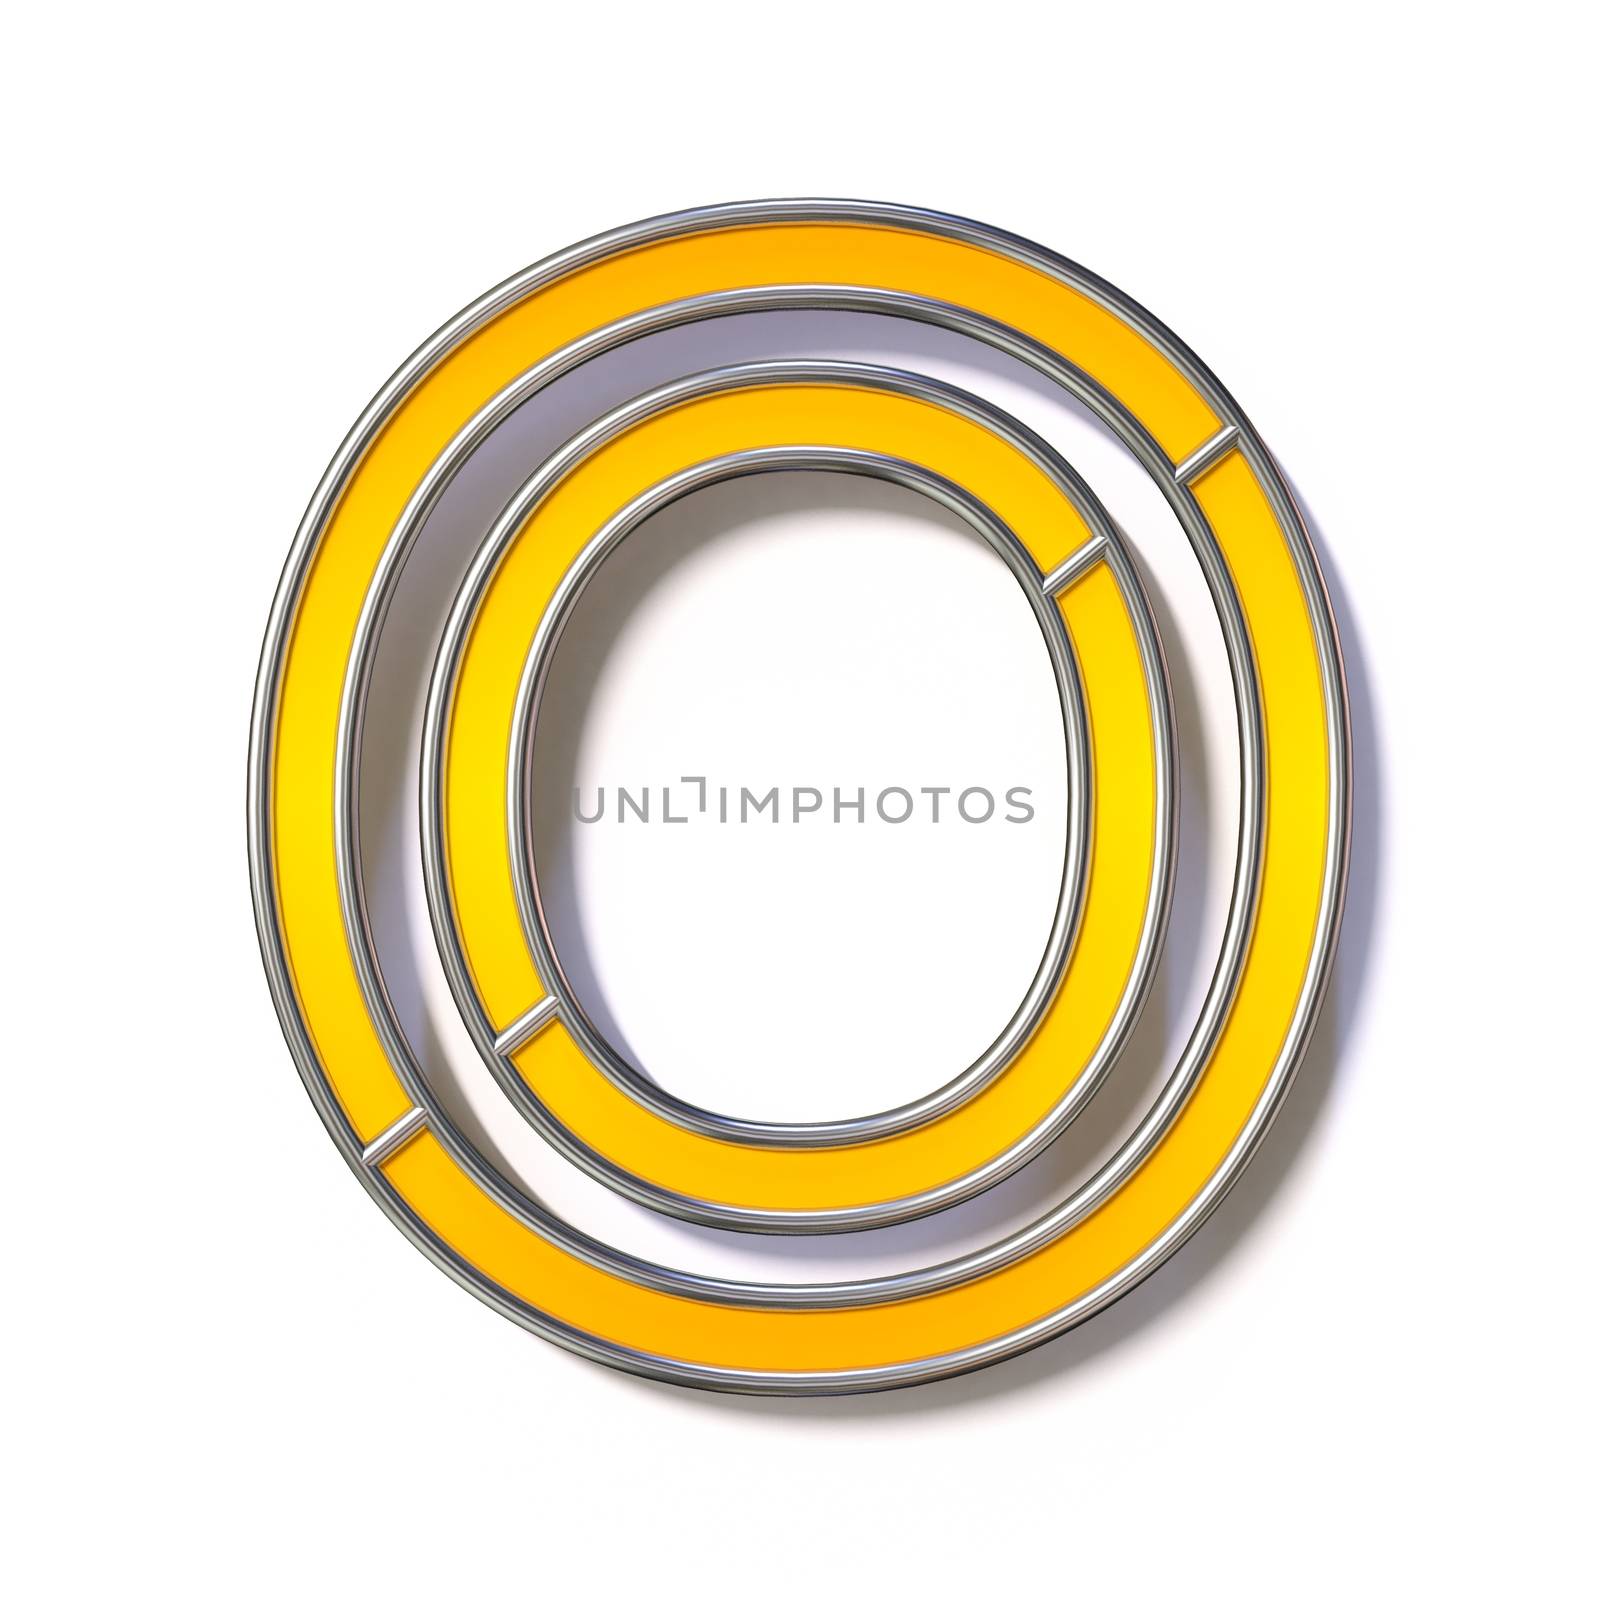 Orange metal wire font Letter O 3D rendering illustration isolated on white background